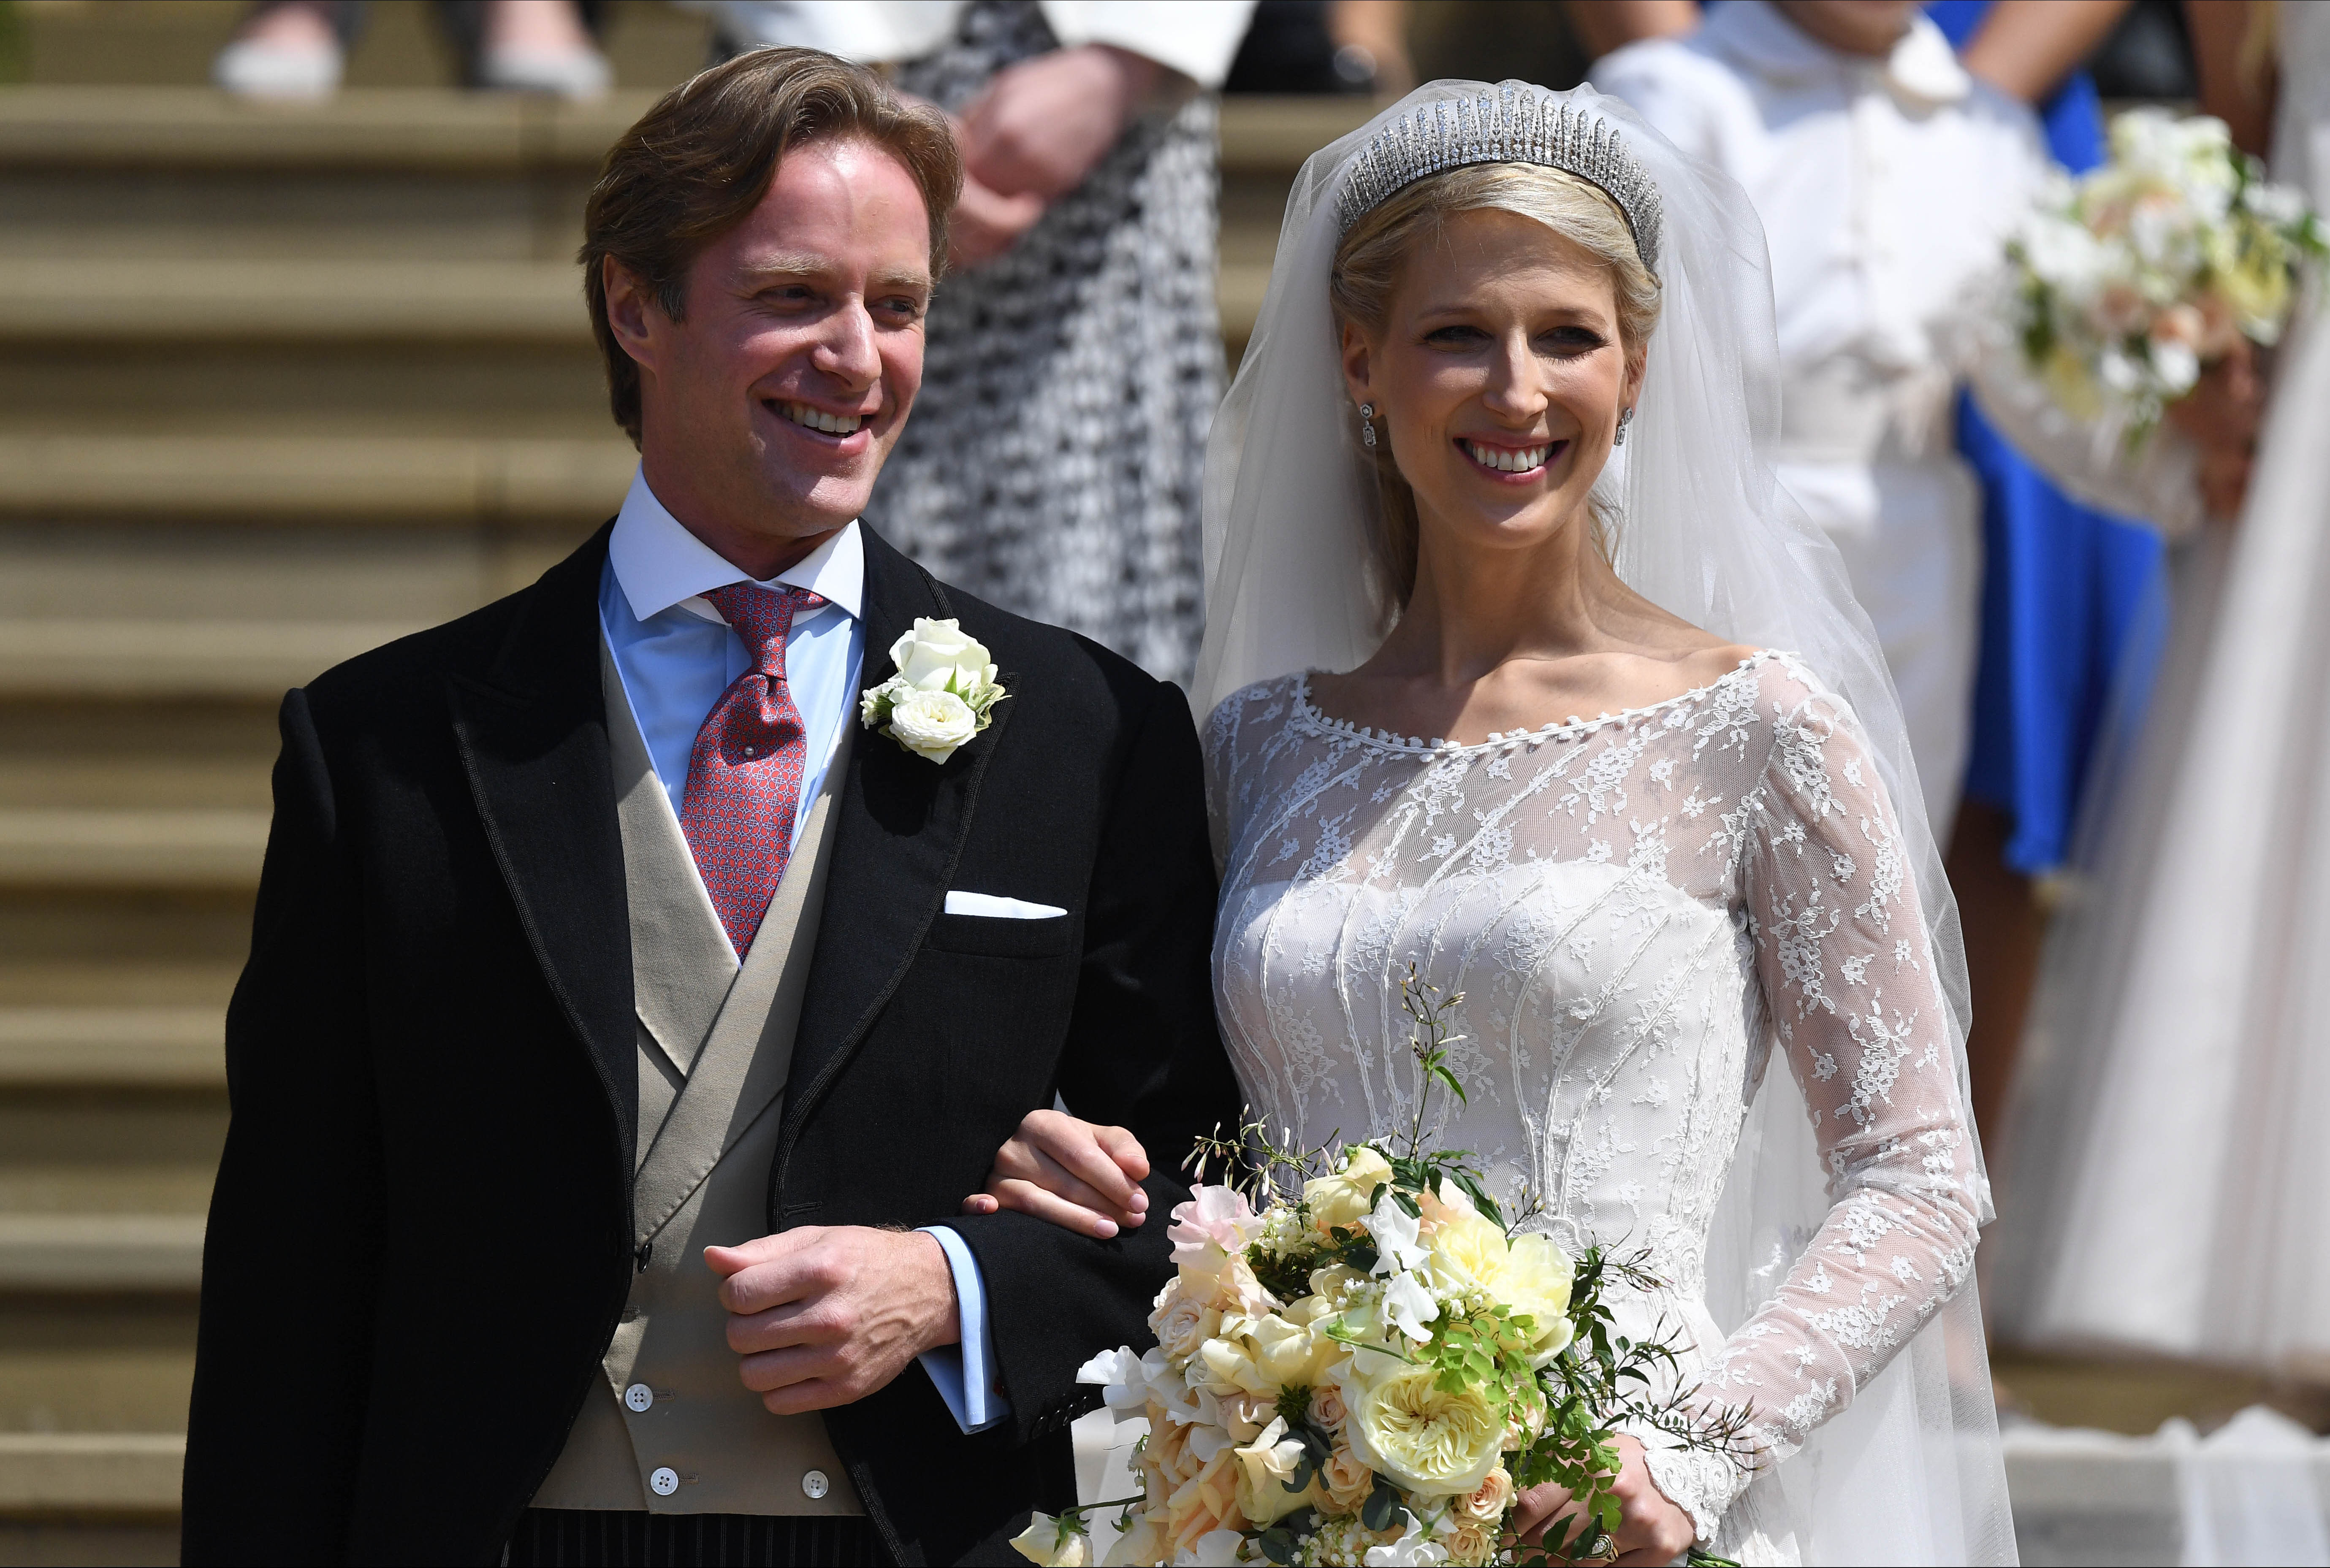 Thomas Kingston and Lady Gabriella Windsor | Photo: Getty Images